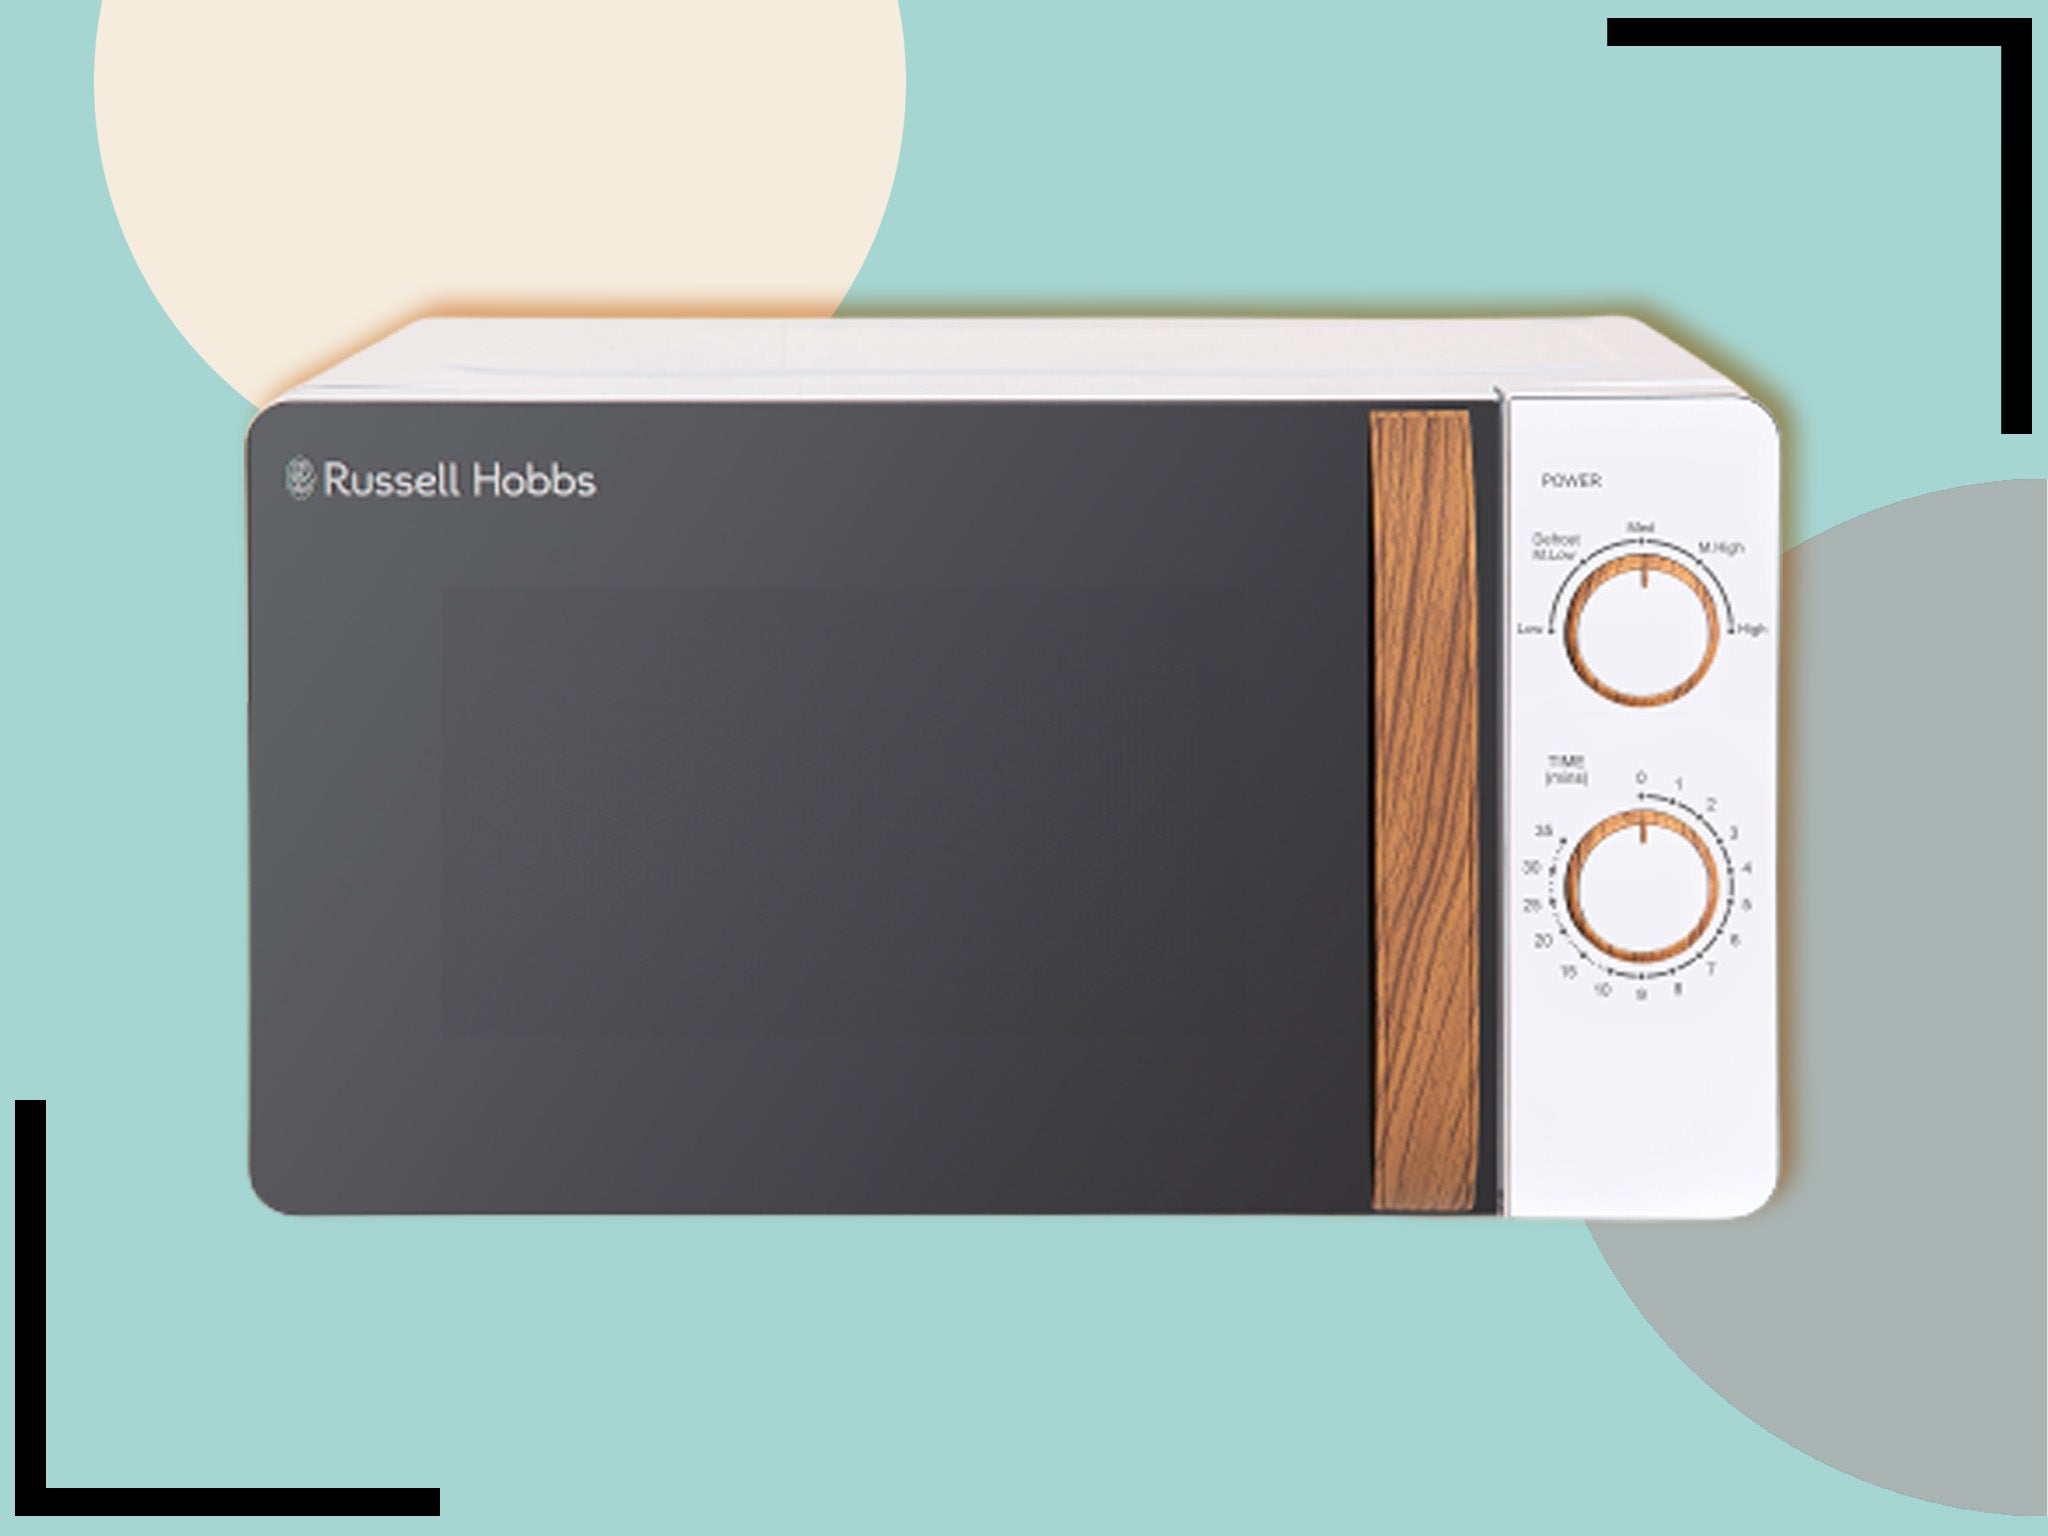 Russell Hobbs Scandi Digital Microwave Review: Stylish and cheap